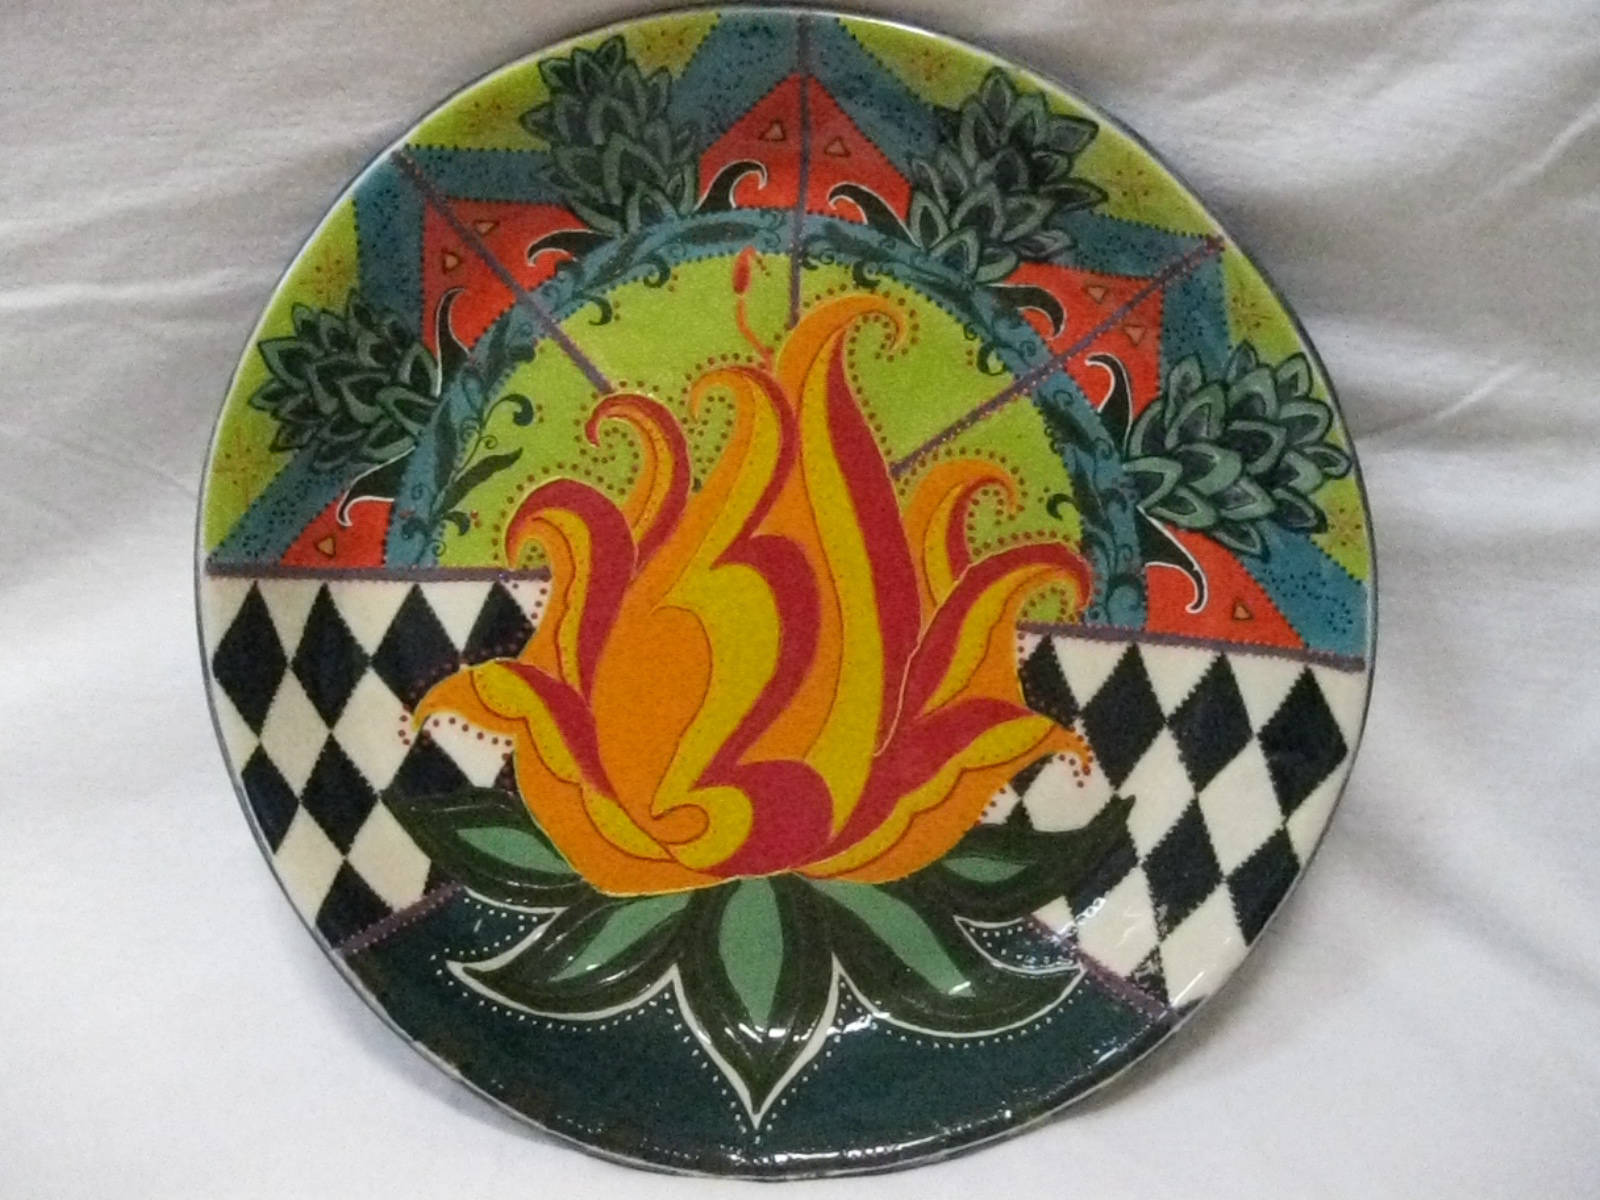 Large Stoneware Platter with "Boteh" Palmette